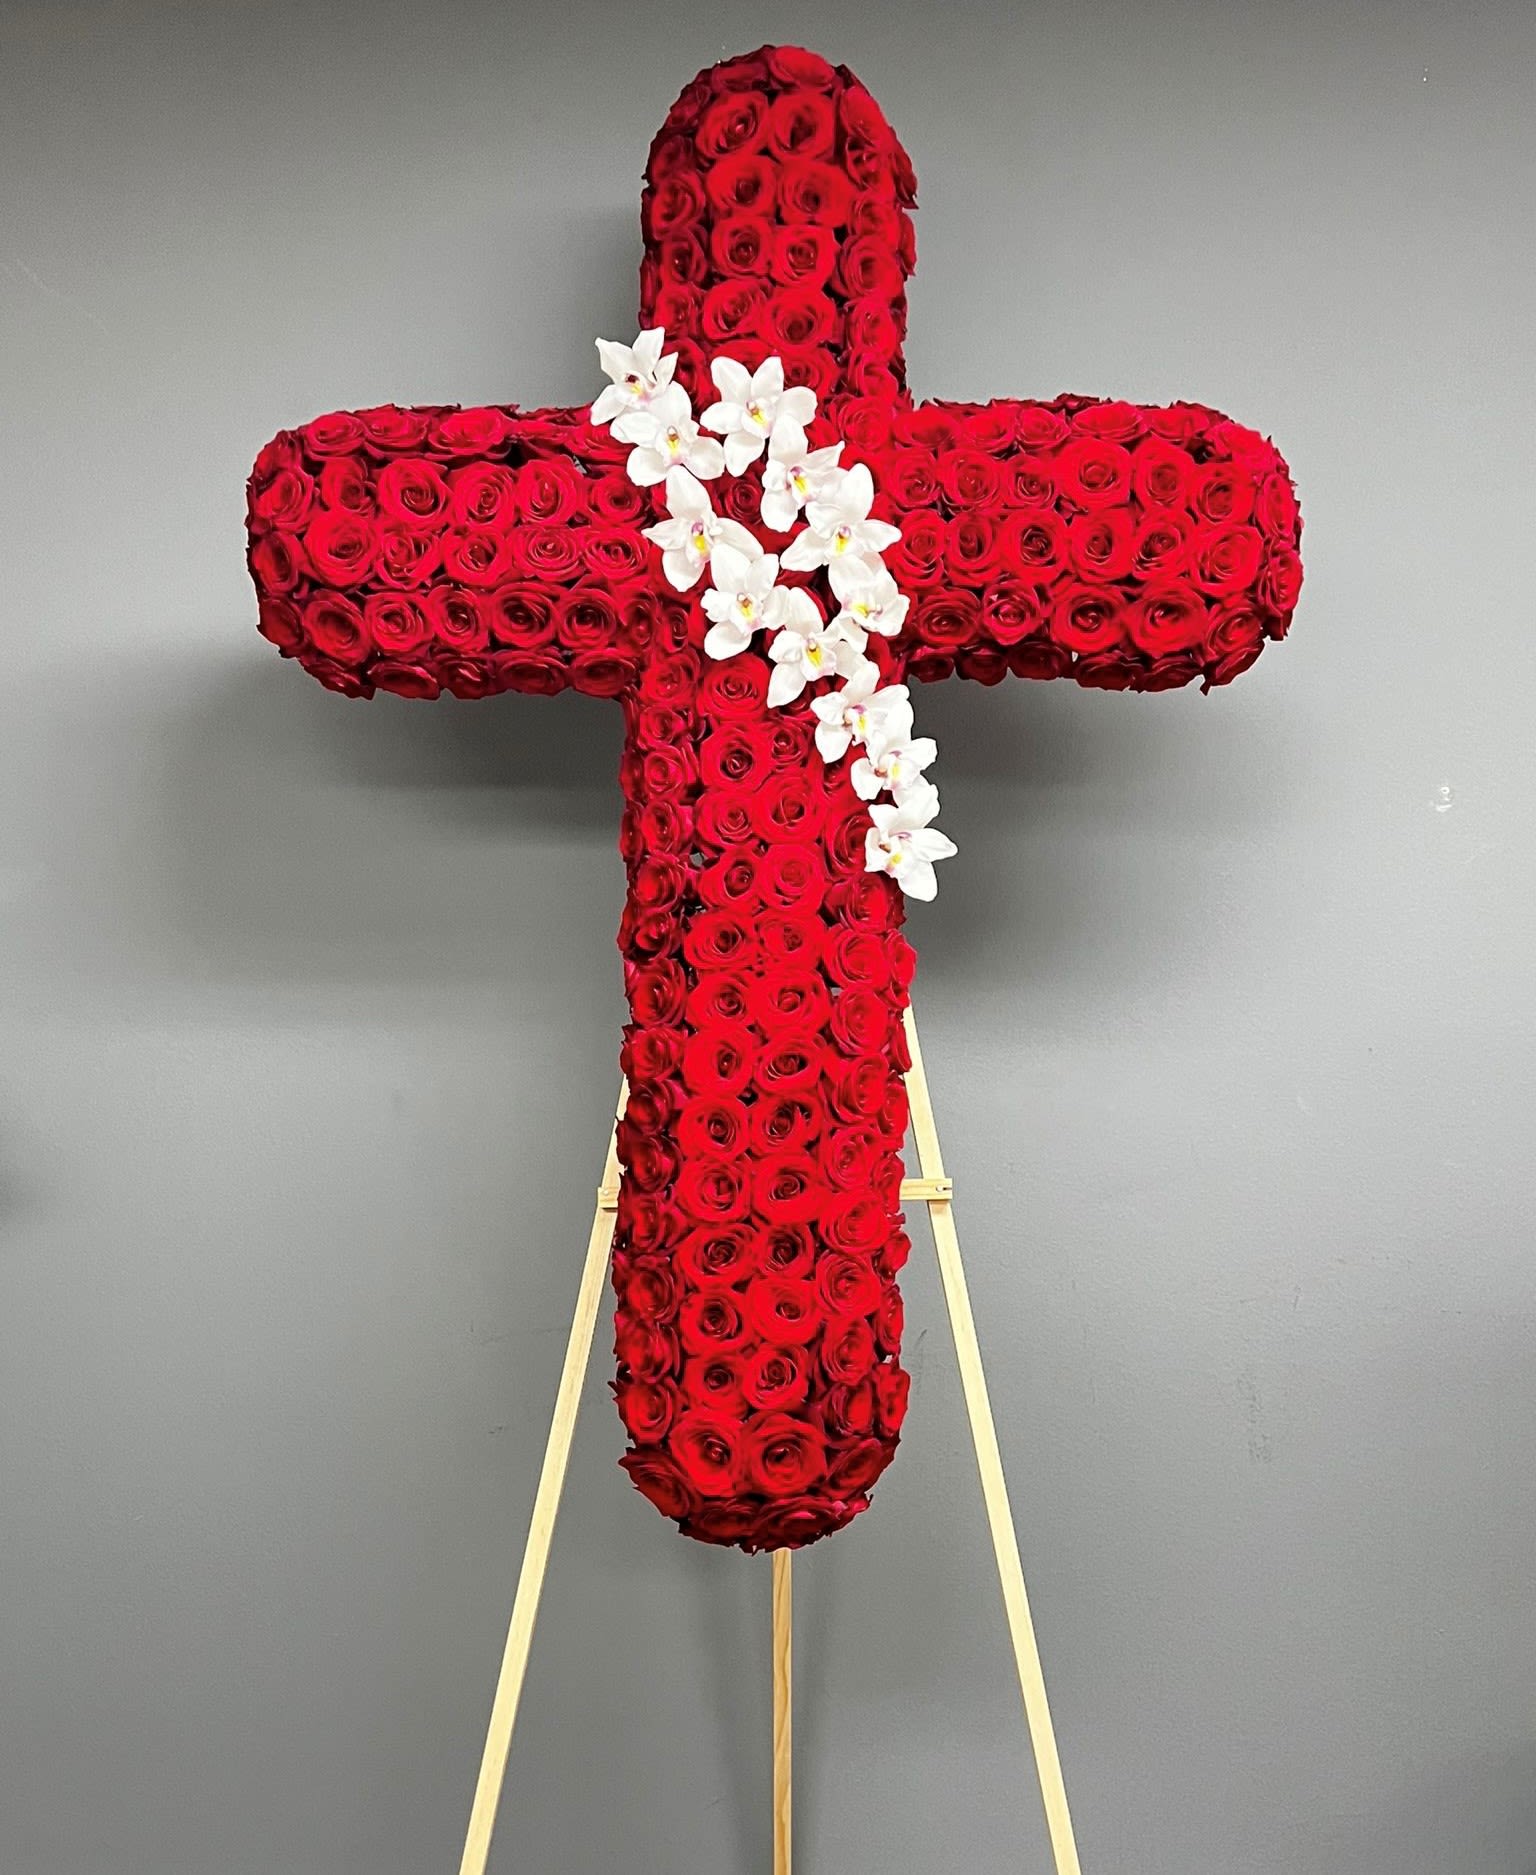 Red Cross with Orchids - This arrangement is a beautiful and symbolic tribute for a funeral service. It combines the elegance of red roses and the grace of cymbidium orchids to create a meaningful display. The arrangement is designed in the shape of a cross, representing faith, hope, and love. The cross is typically placed on an easel, allowing it to be prominently displayed during the service. The use of an easel ensures that the arrangement is visible from different angles, allowing everyone to appreciate its beauty. The choice of red roses symbolizes love, respect, and deep affection for the departed. Red roses are often associated with strong emotions and are commonly used in funeral arrangements to convey heartfelt condolences. In the center of the cross, there are cymbidium orchids. These orchids are known for their delicate and exotic beauty, symbolizing love, luxury, and strength. Their presence in the arrangement adds a touch of elegance and sophistication. Orchids are arranged with an angle signifying the ascension and transition from earthly life to the spiritual realm. It represents the journey of the departed soul towards eternal peace. Arrangement comes with black or white ribbon with professionally printed letters. Also, you can choose to attach a printed sympathy card. Just make a note during checkout.